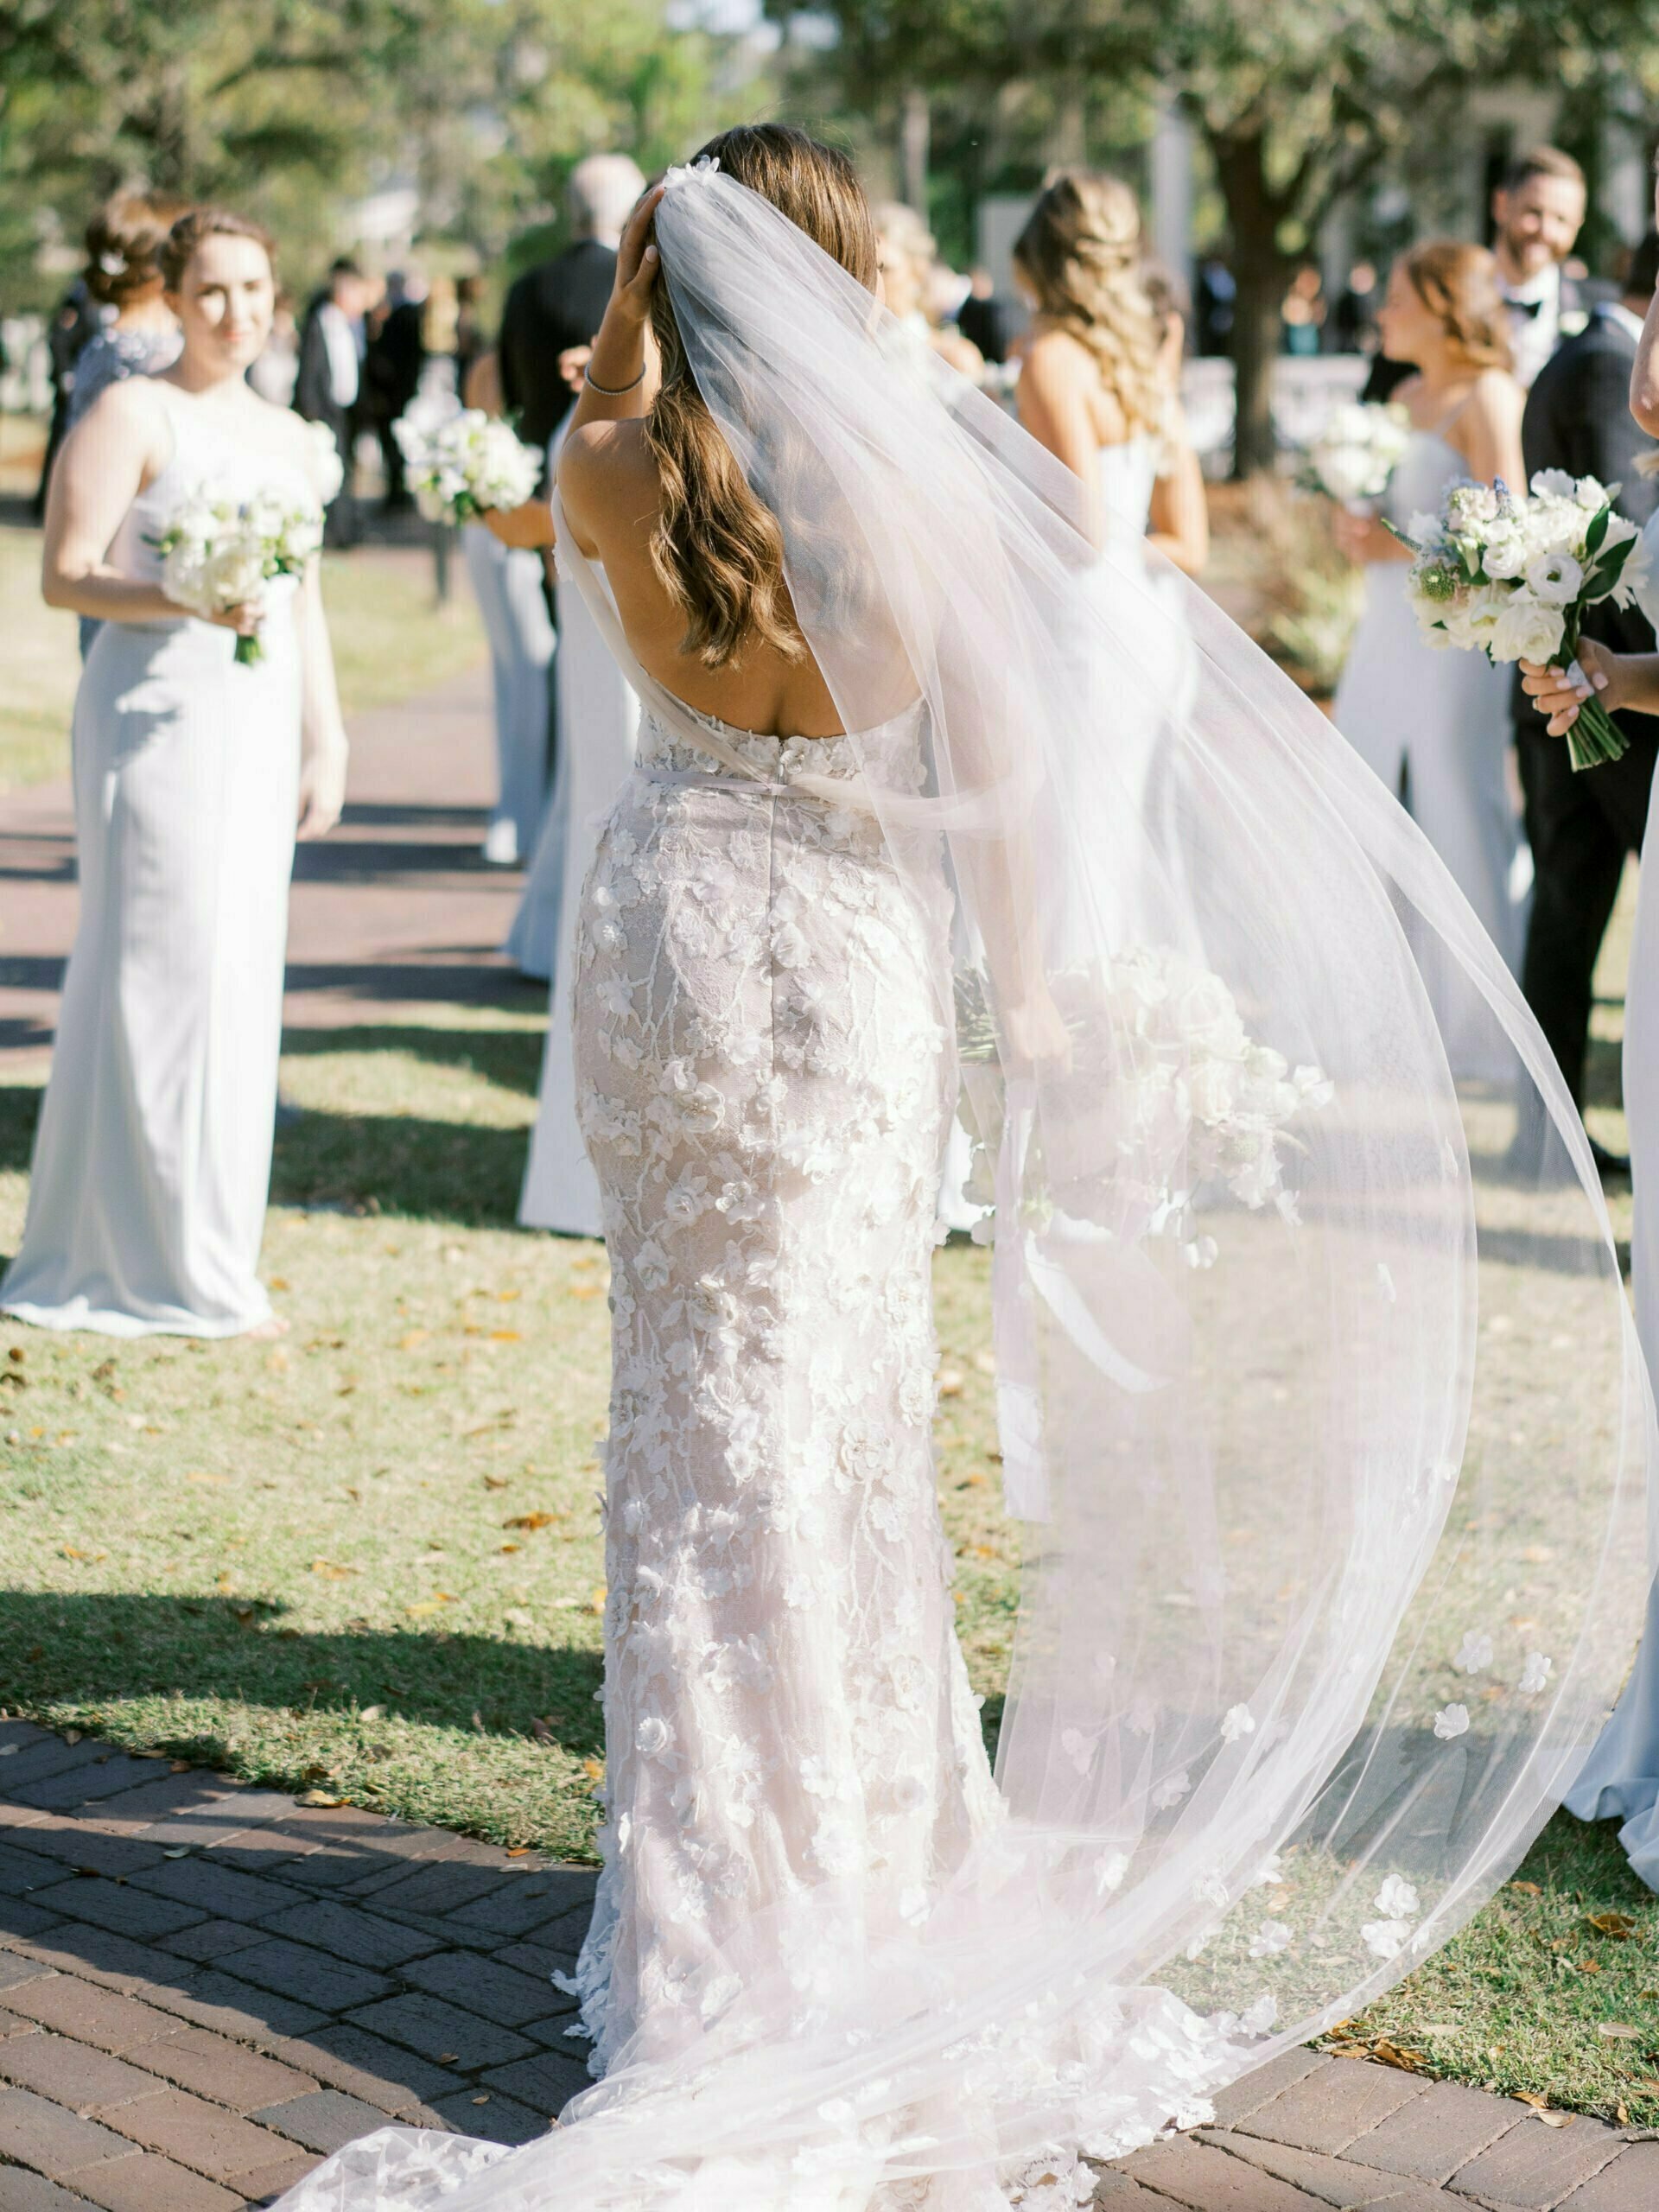 Kinley Meyer wearing Lulu gown and matching veil